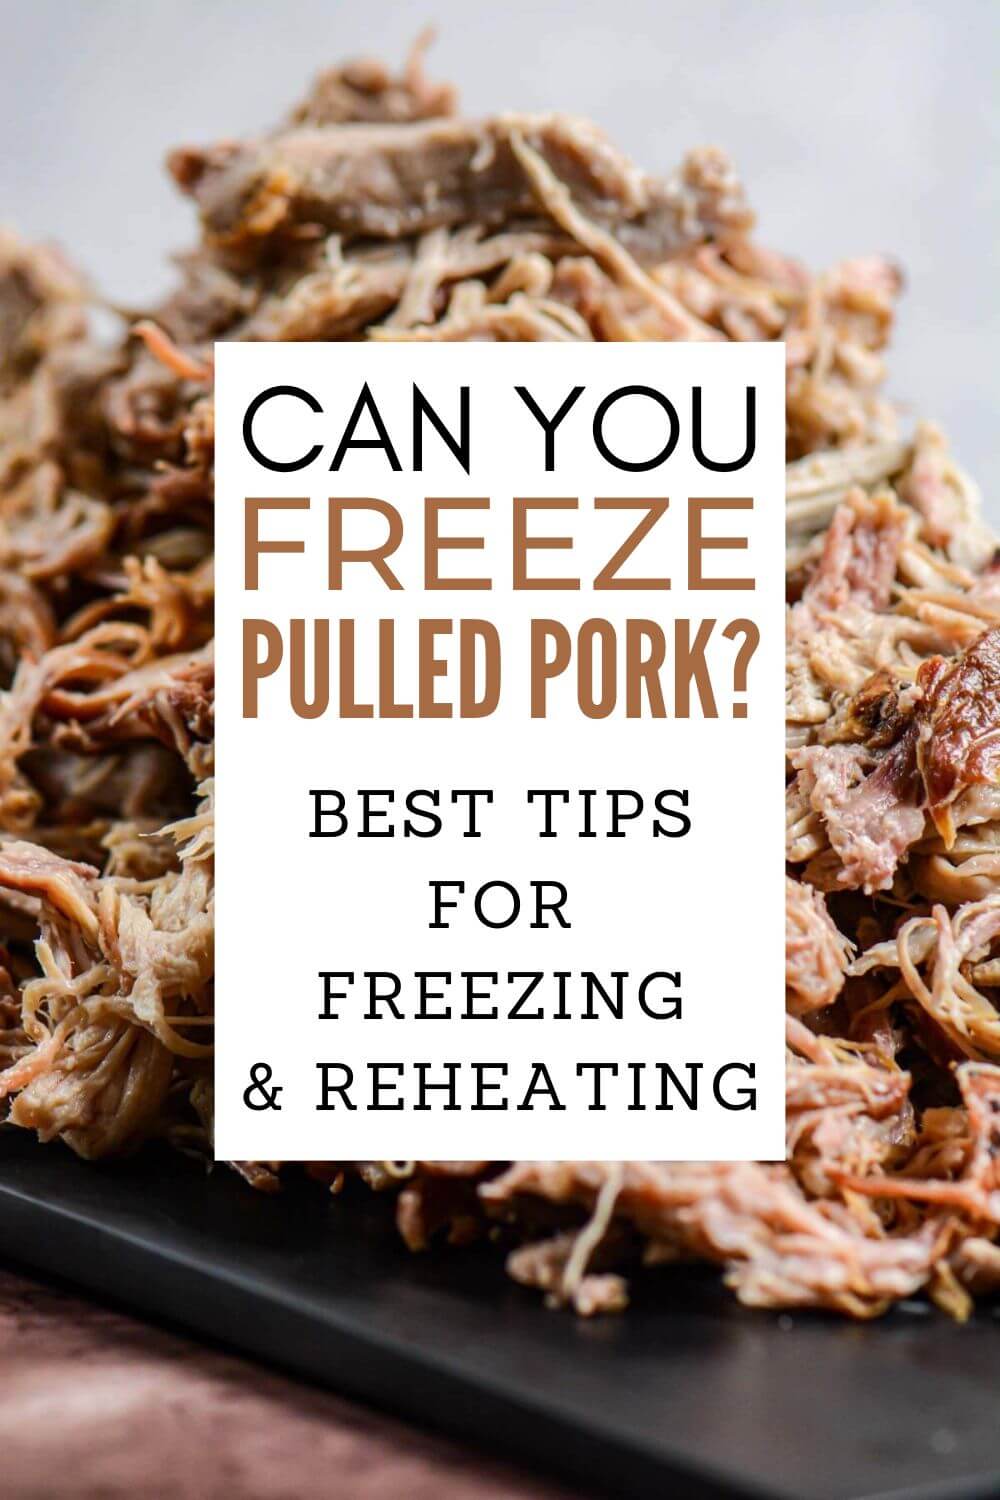 Can You Freeze Pulled Pork? Best Tips For Freezing & Reheating